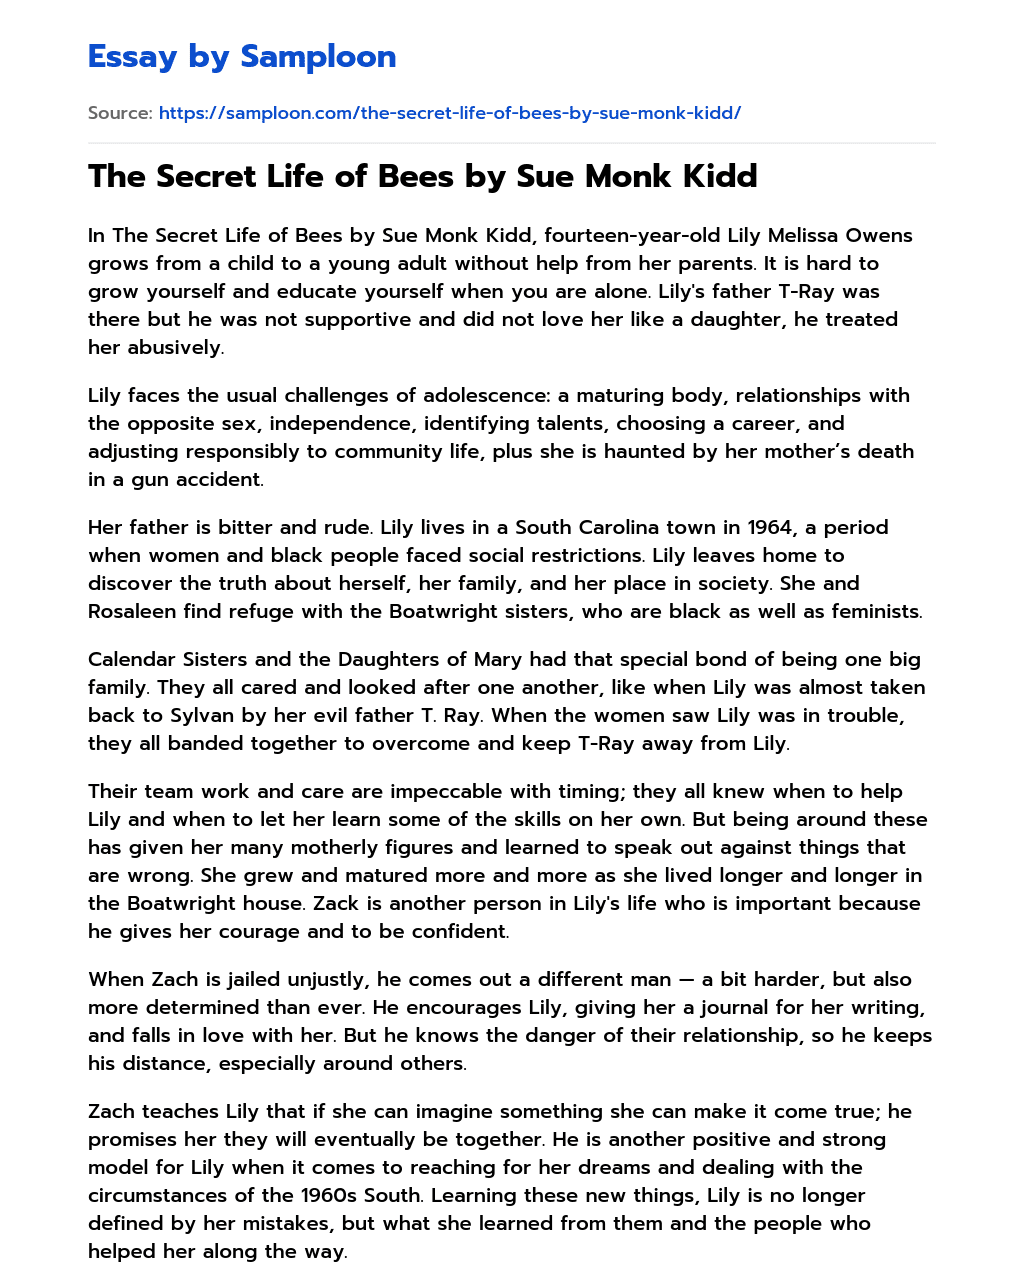 The Secret Life of Bees by Sue Monk Kidd essay